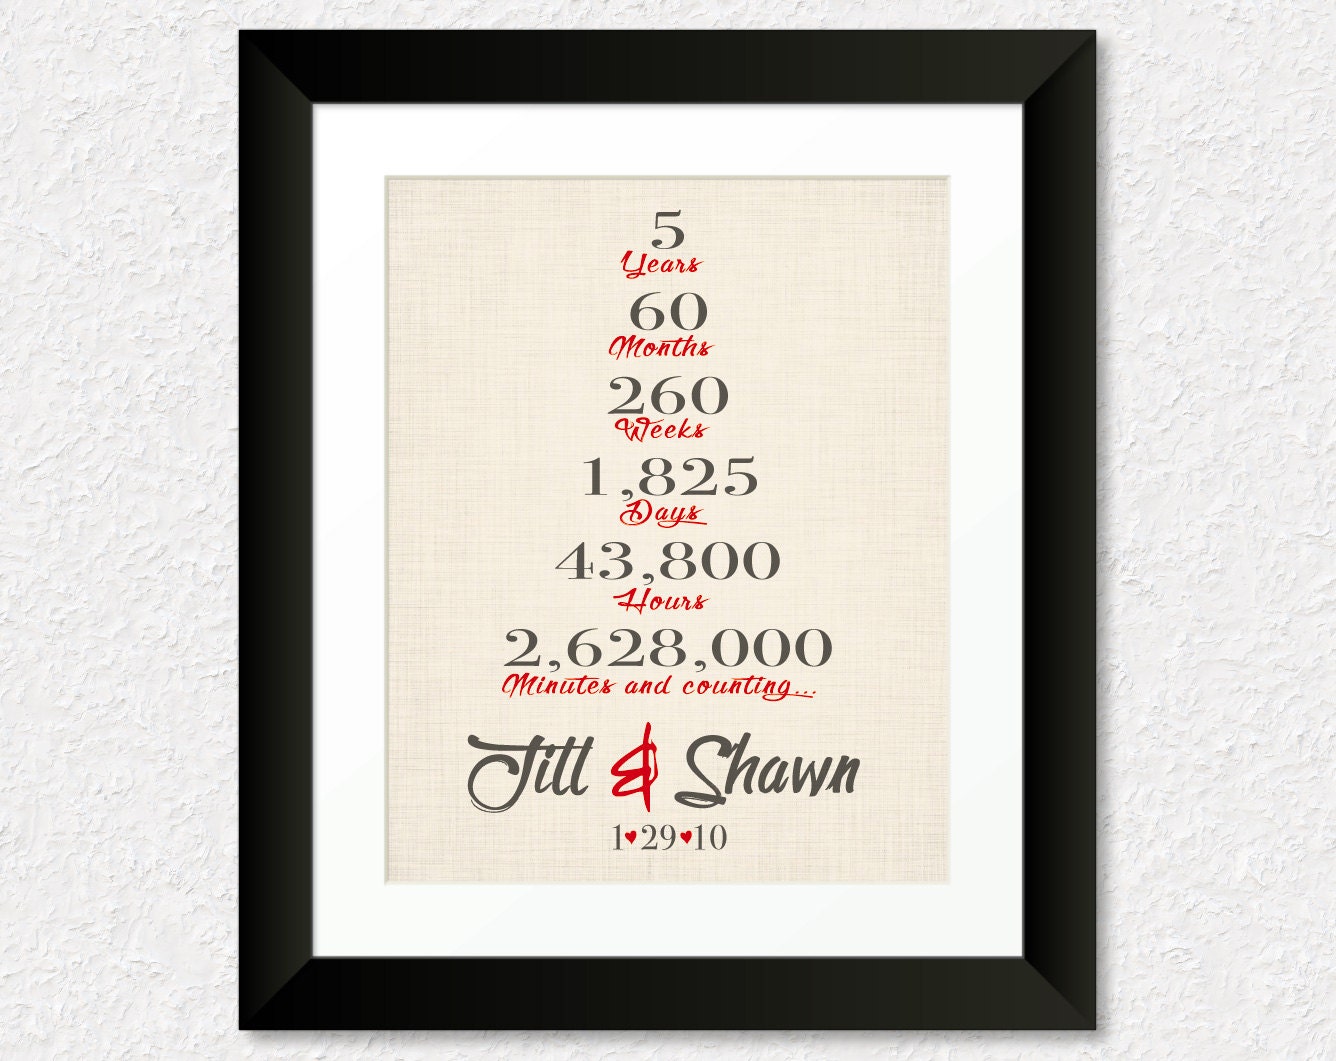 Thoughtful 5 Year Anniversary Gifts
 5 Year Anniversary Gift Five Year Wedding Anniversary Gift